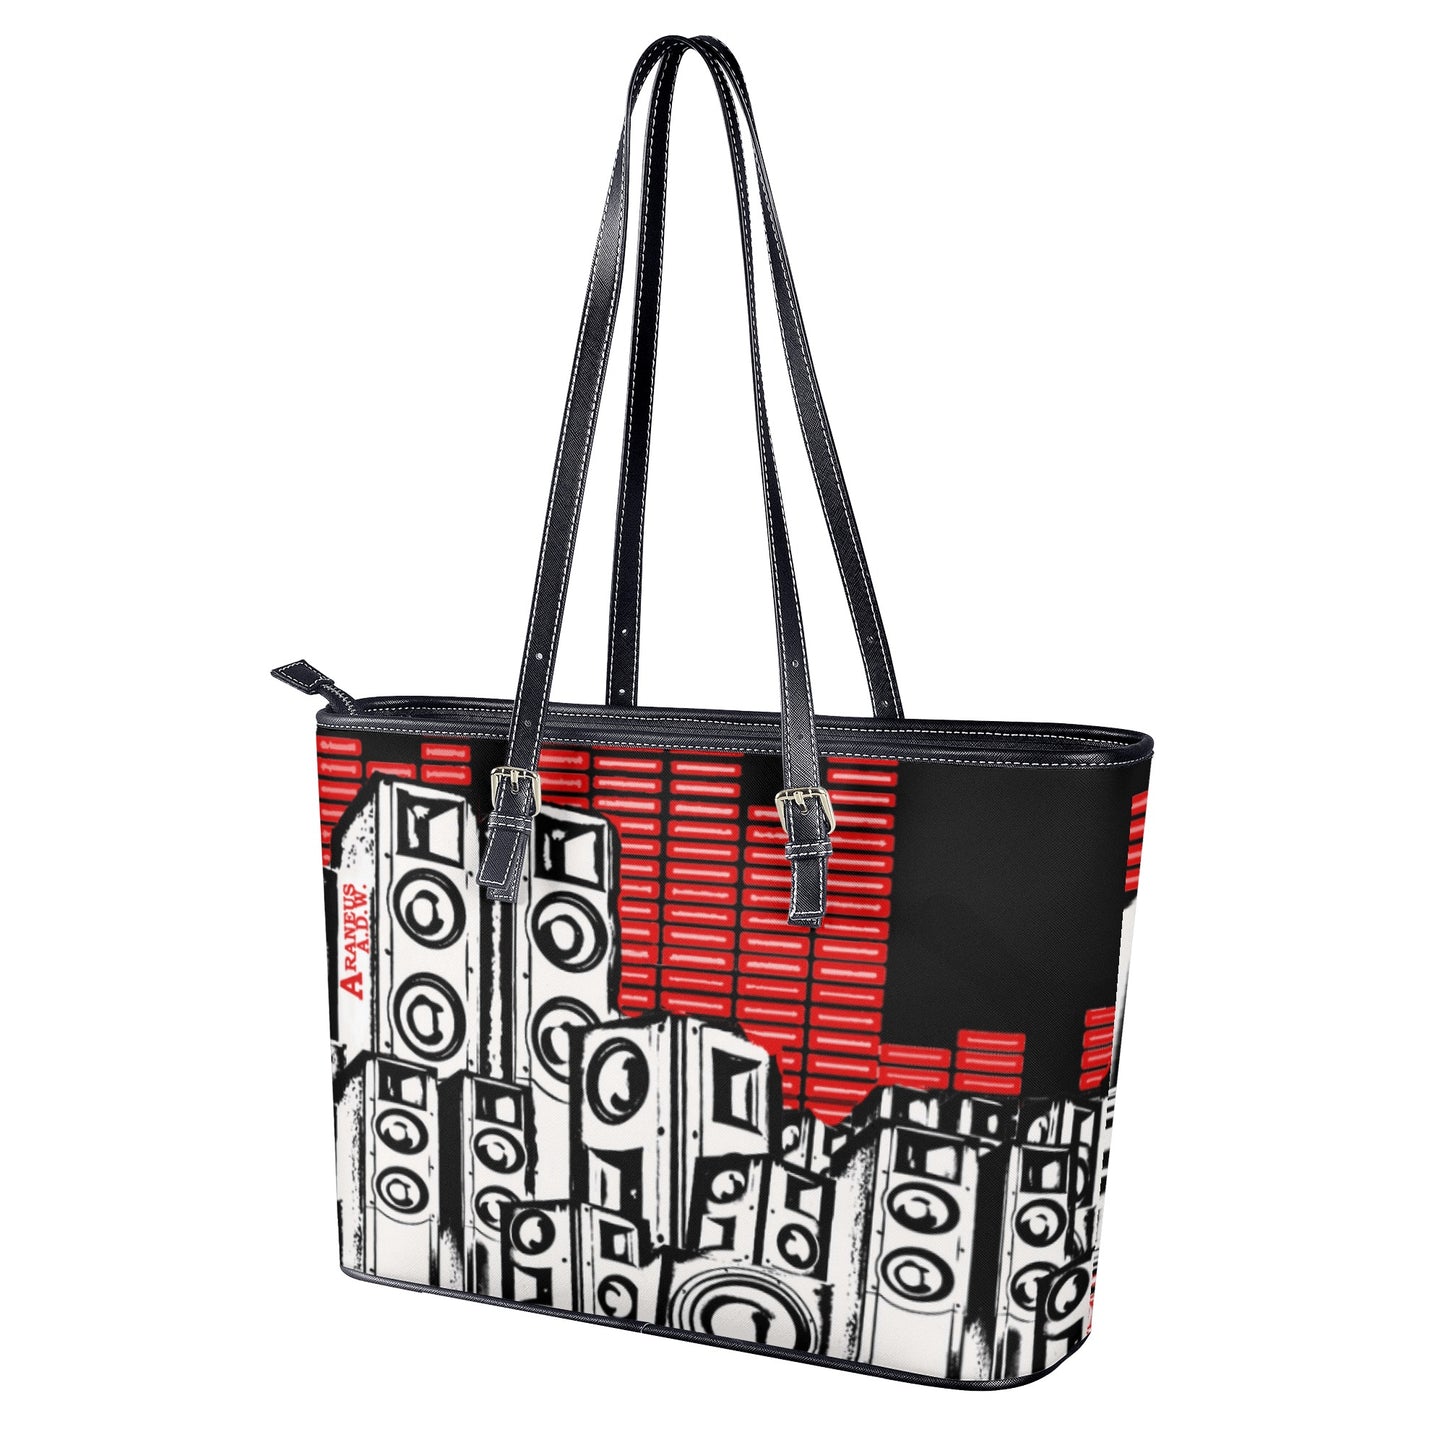 Bass In The City Leather Tote Bag - HipHatter